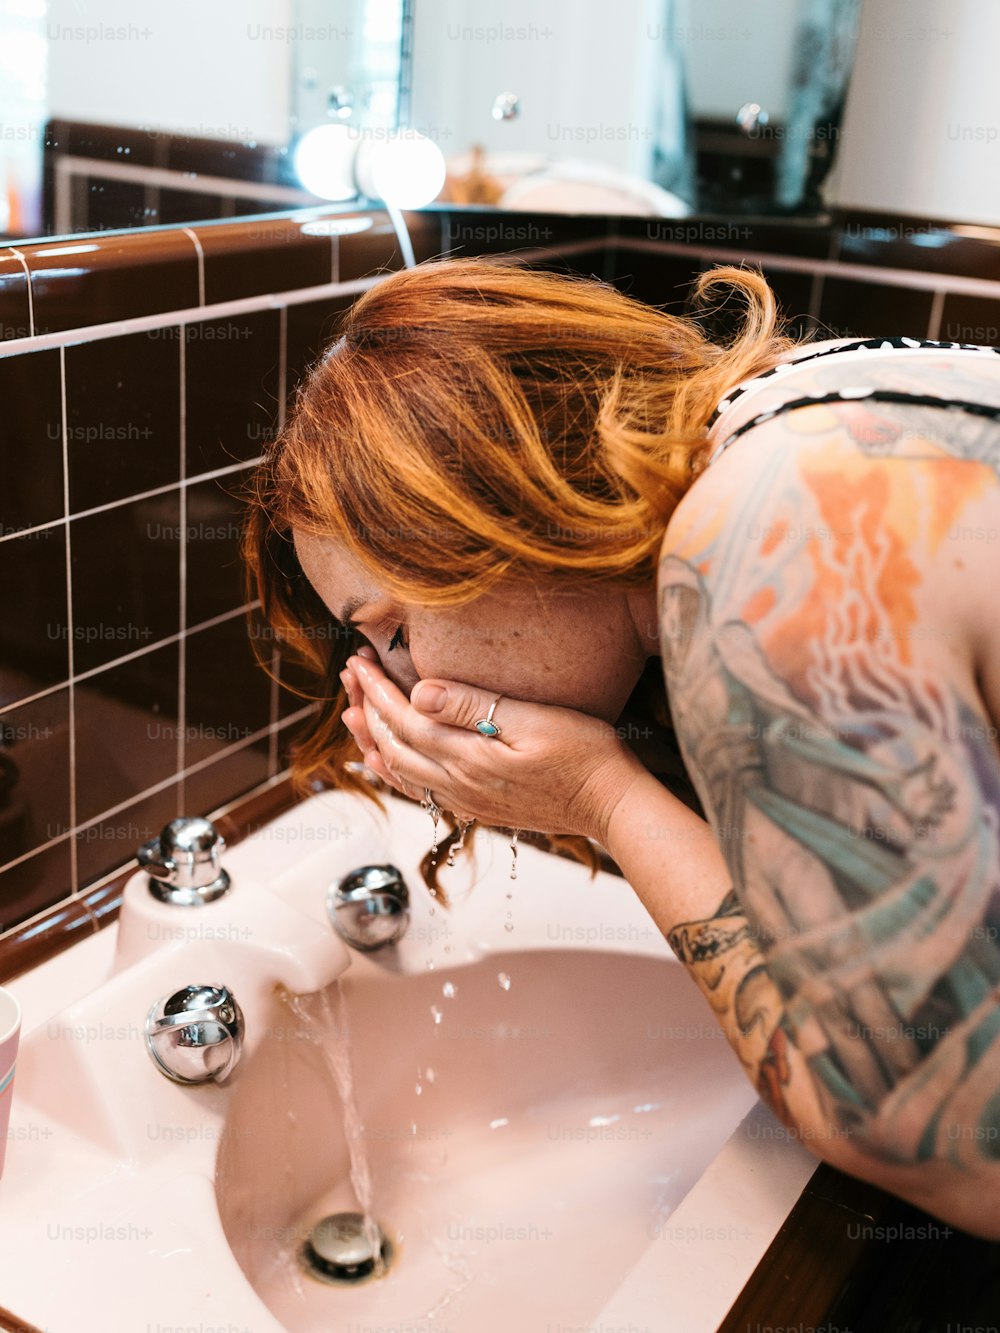 a woman with red hair is leaning over a sink